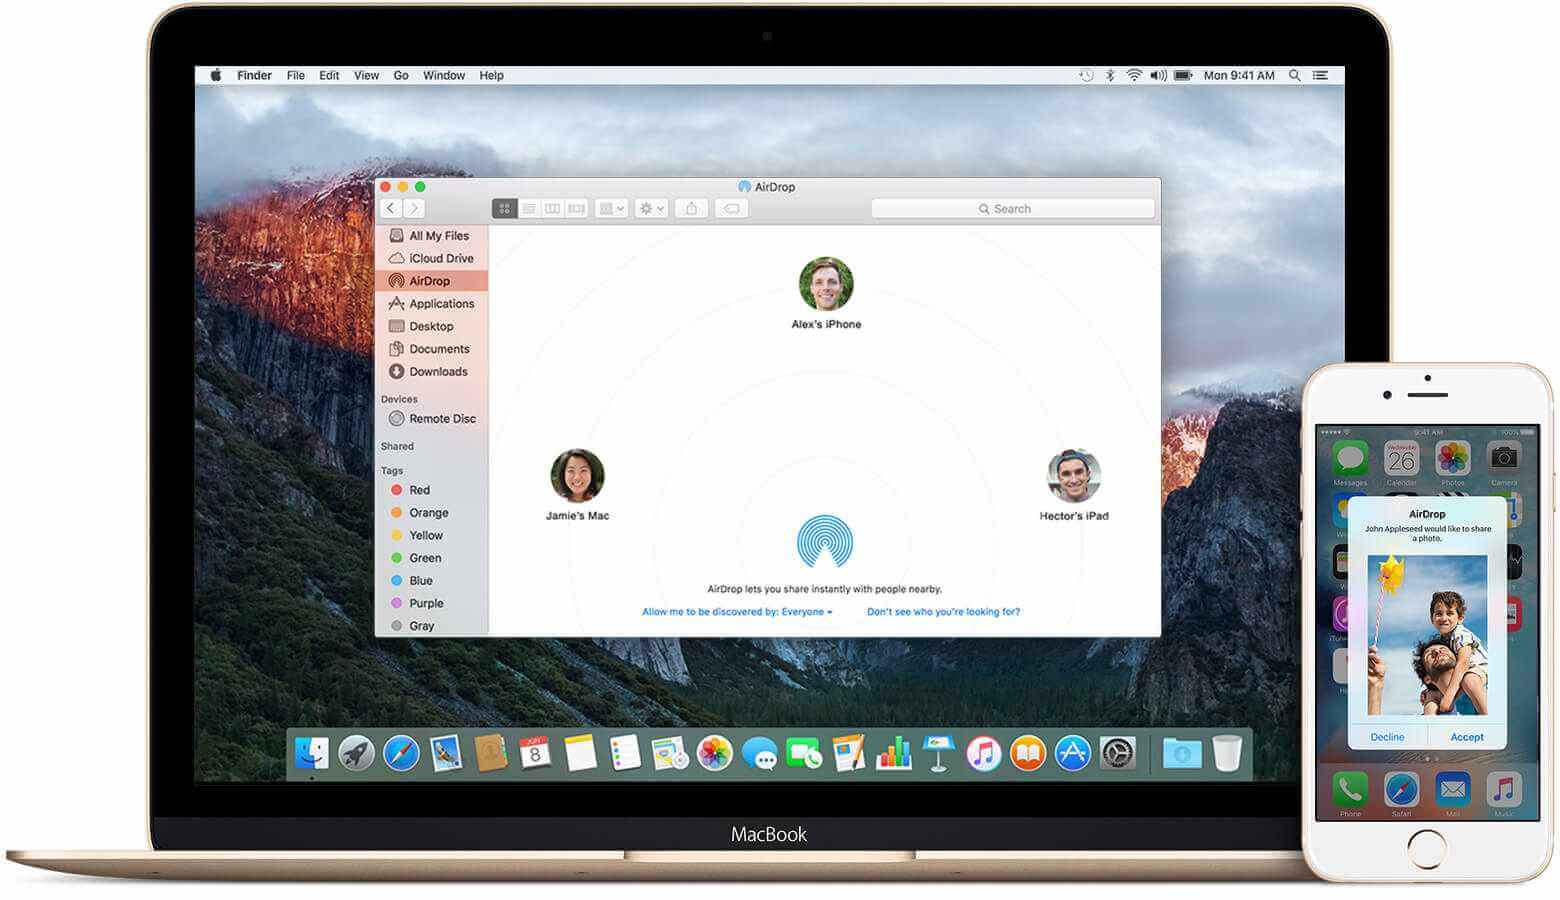 AirDrop from iPhone to Mac